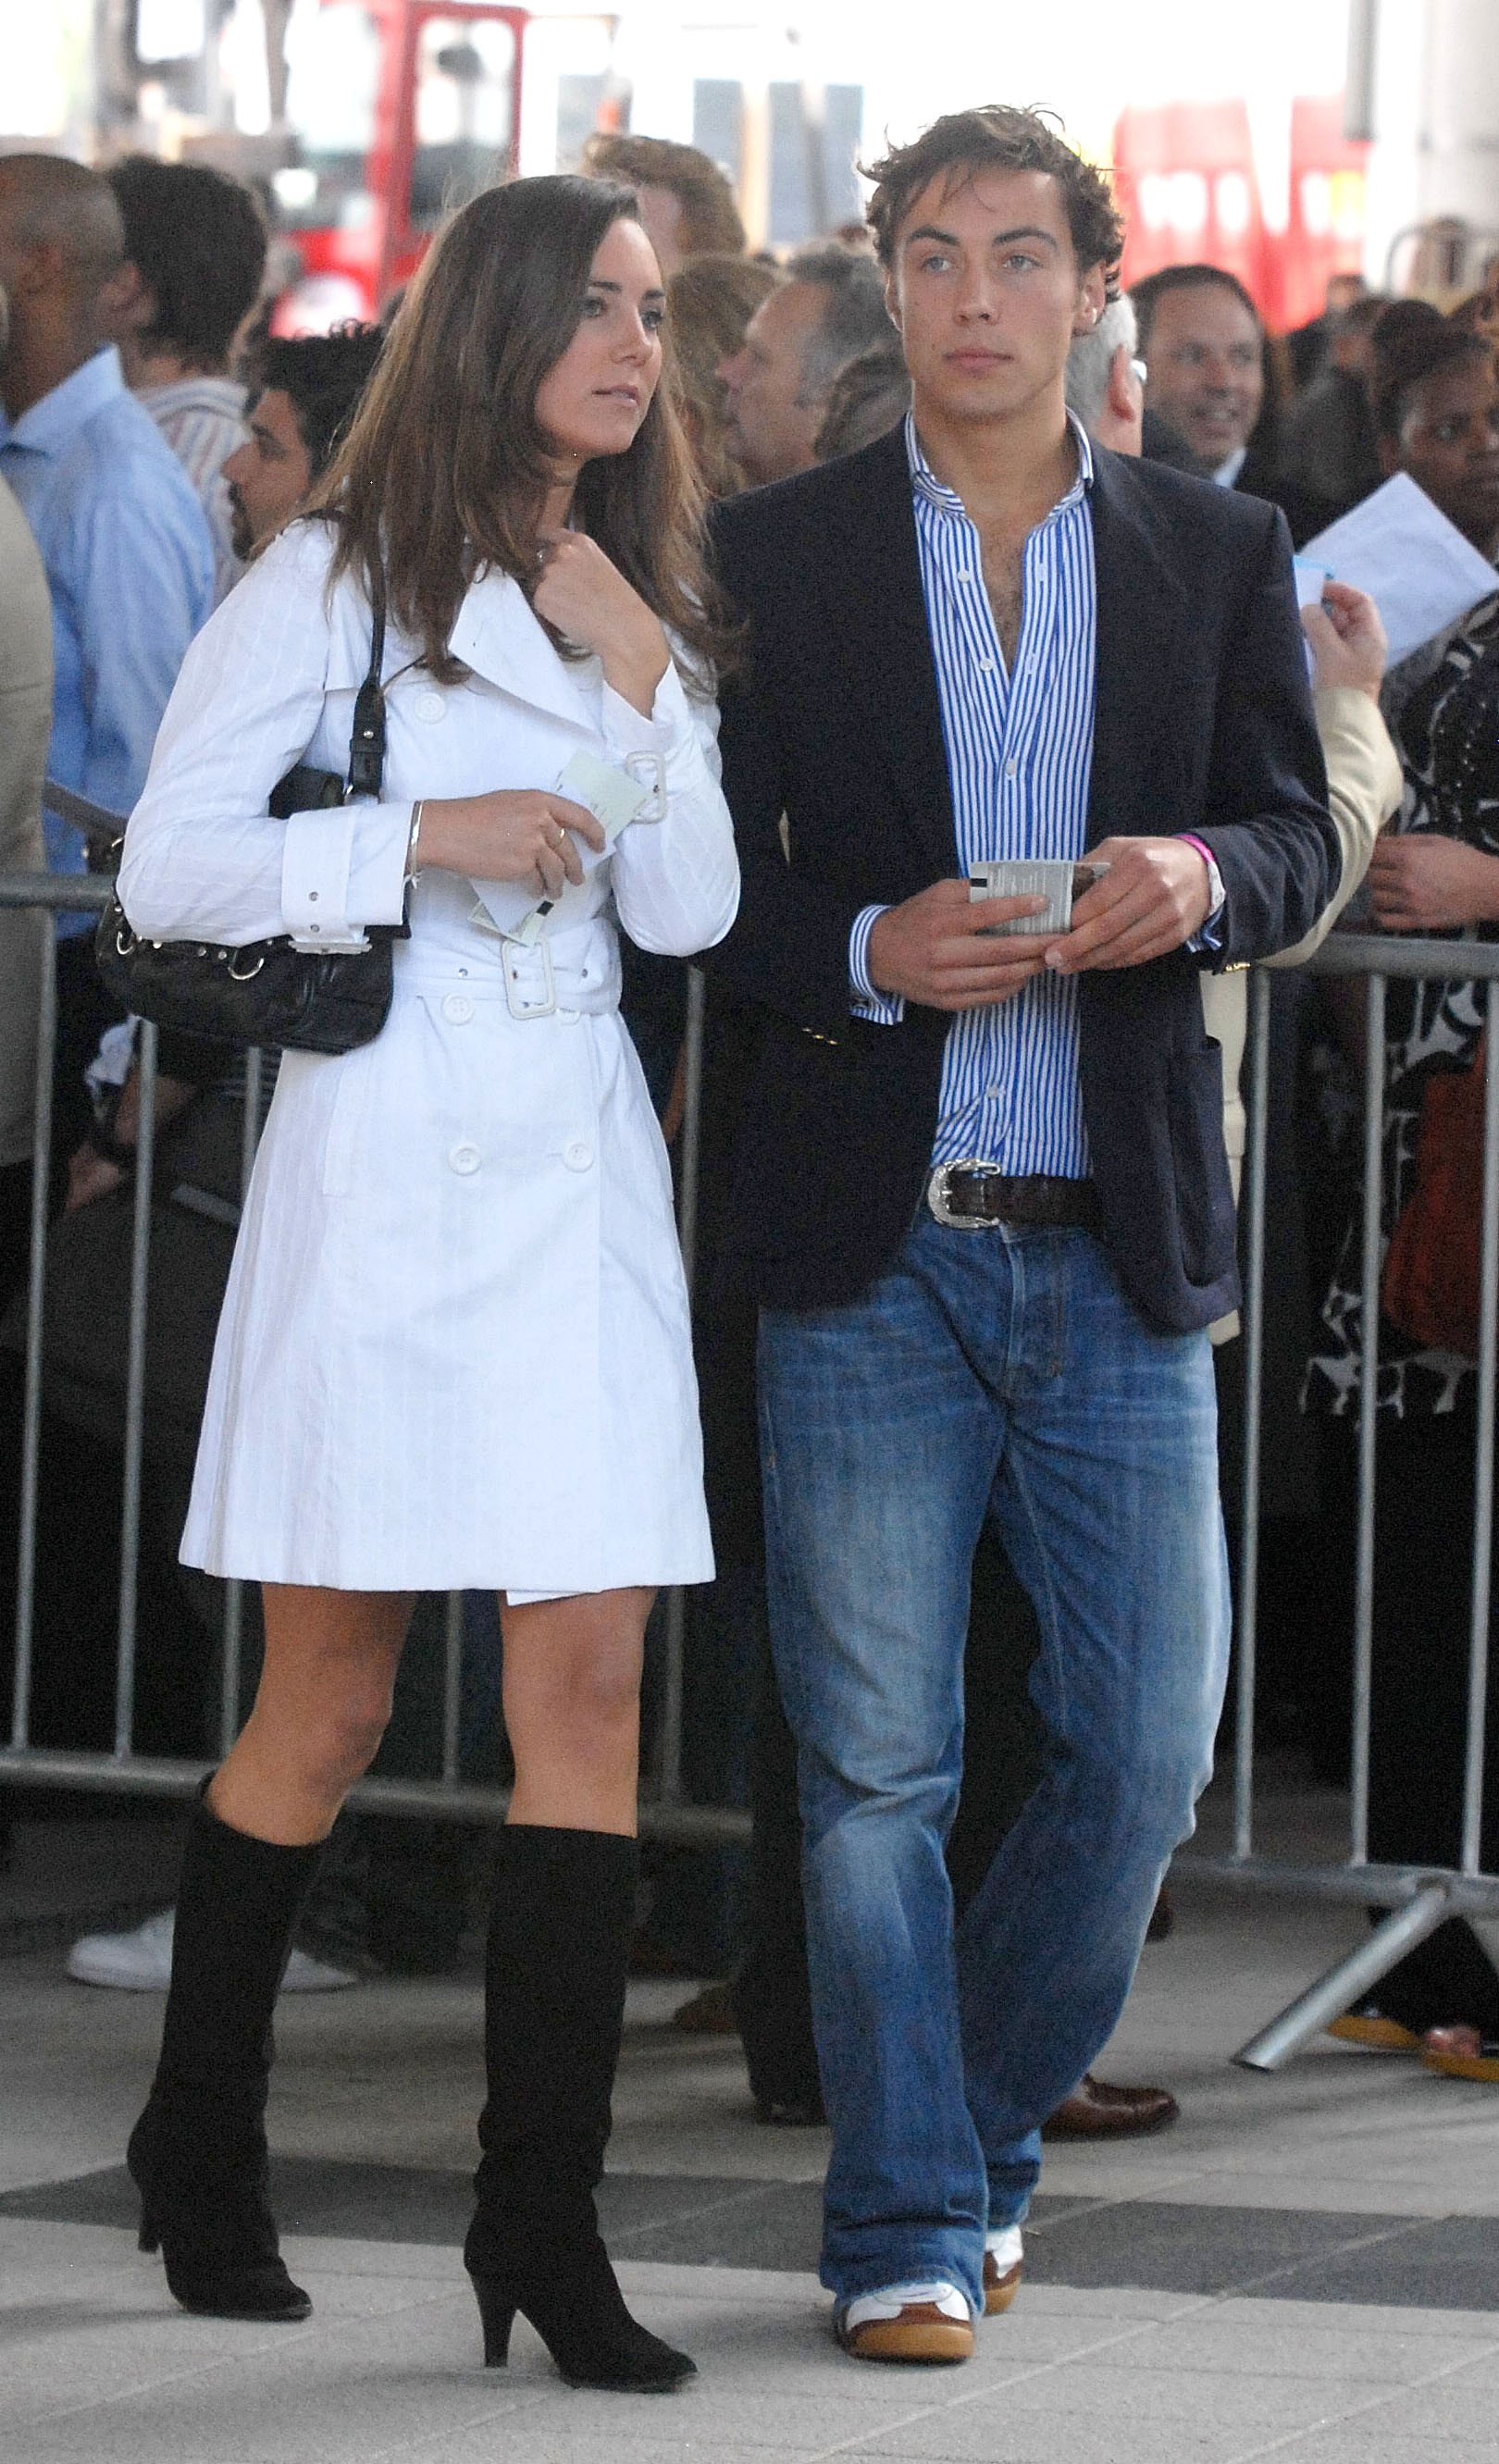 Kate and James Middleton arriving at the Concert for Diana in London, England in 2007. | Source: Getty Images